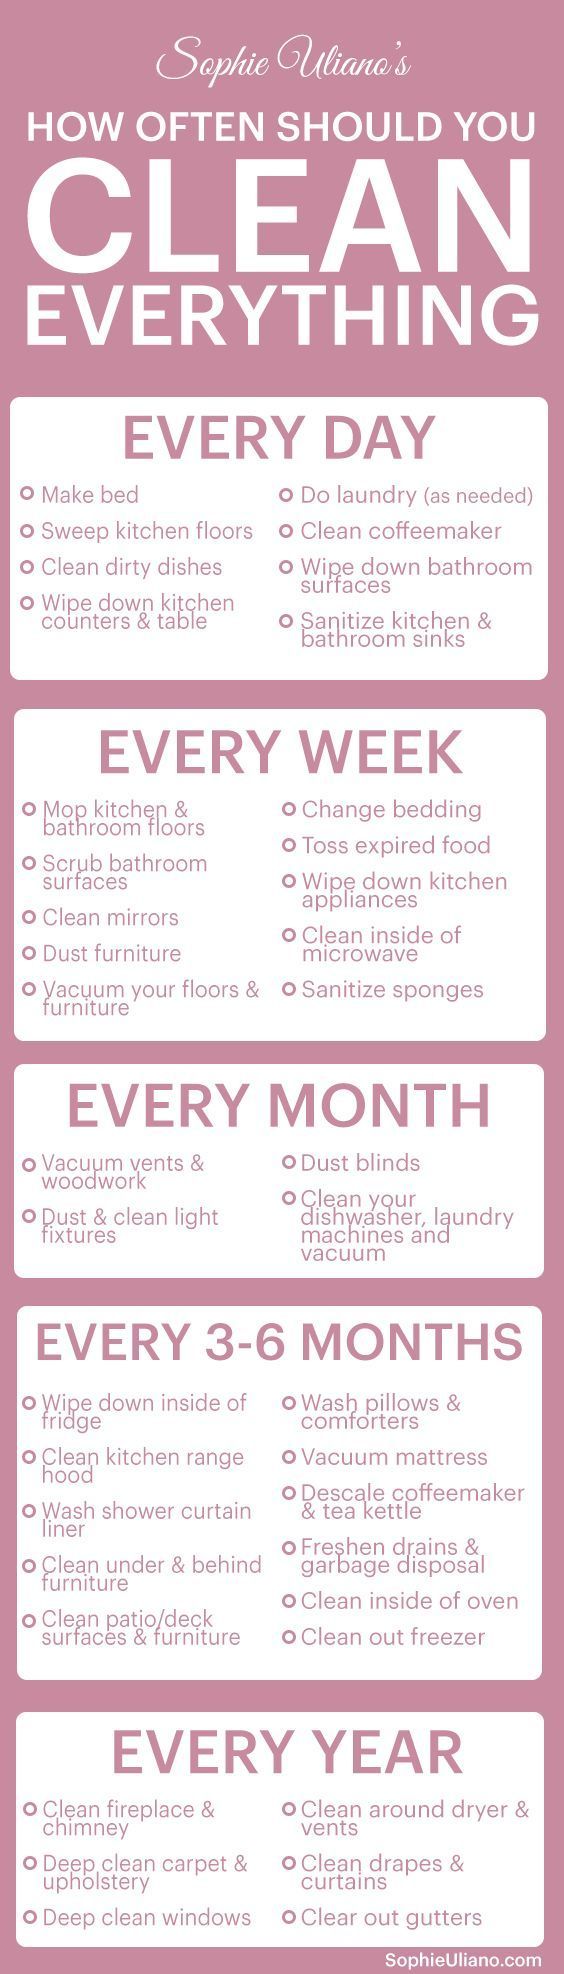 These 10 Cleaning Hacks that every girl should know are SO GOOD! Im so glad I